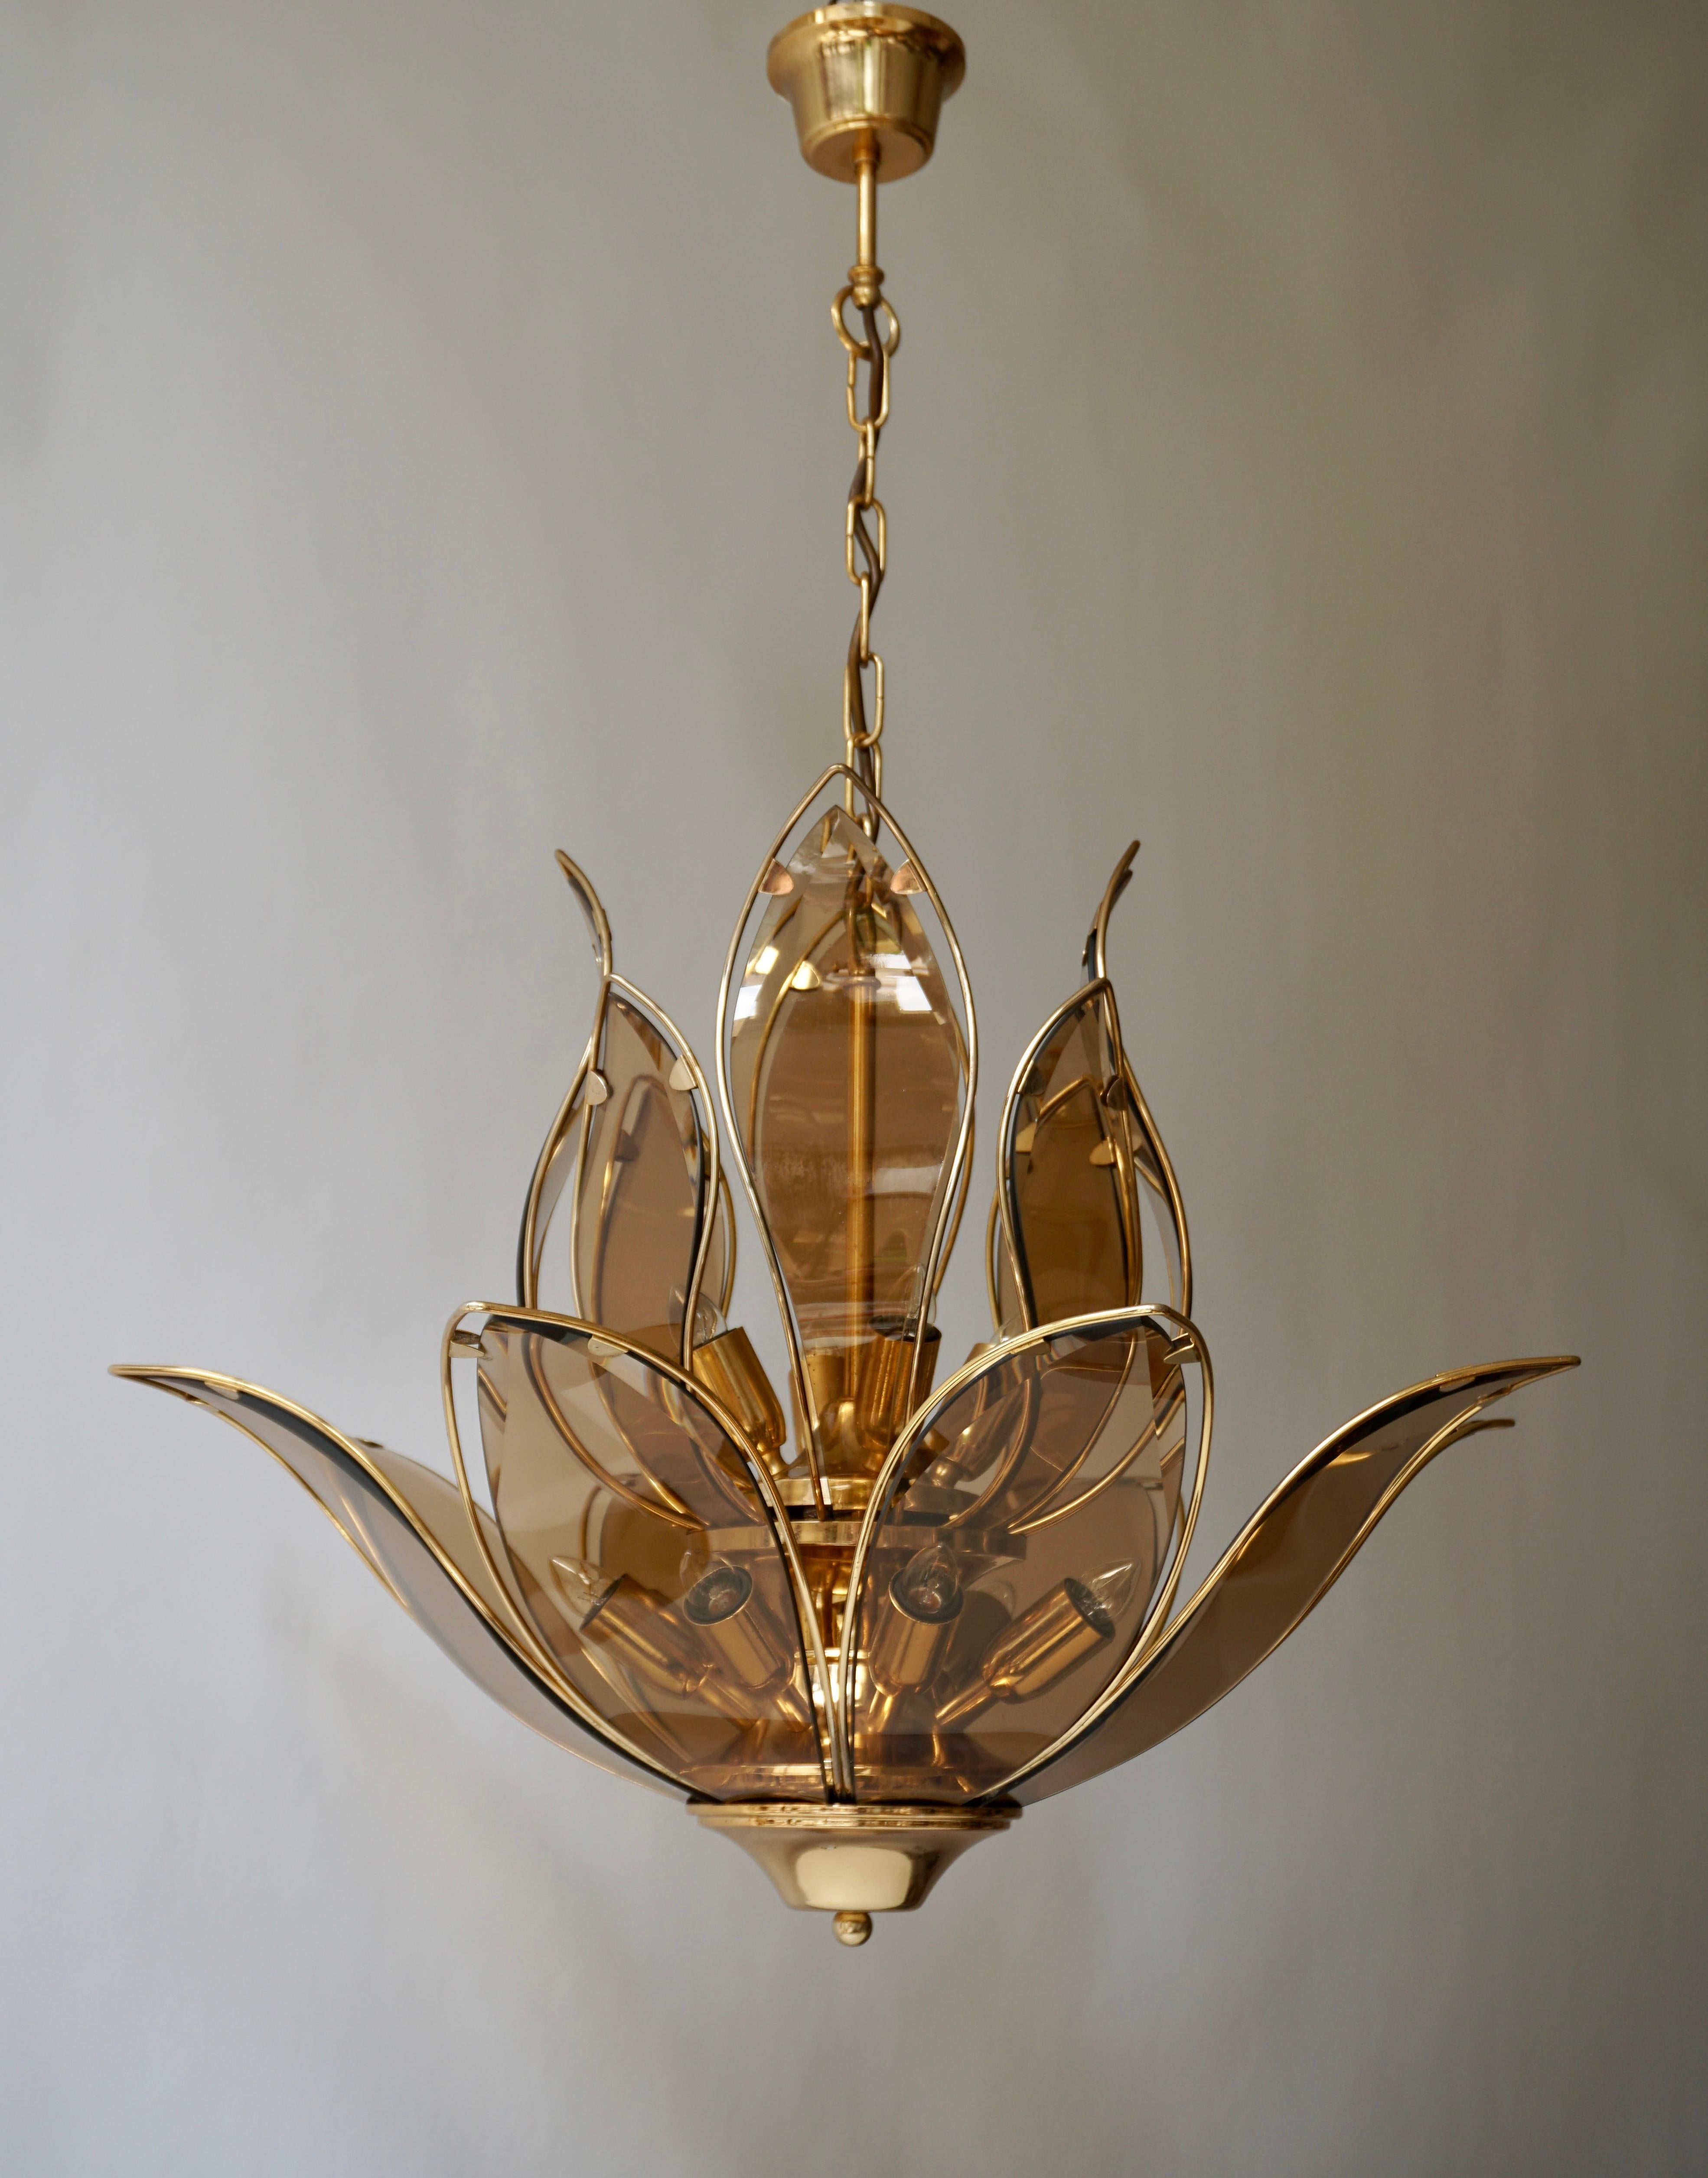 An outstanding and highly elegant brass and Murano glass chandelier in lotus flower shape of very good quality. This chandelier dates from the 1970s and is Italian by origin. 
The light requires twelve single E14 screw fit lightbulbs (60Watt max.)